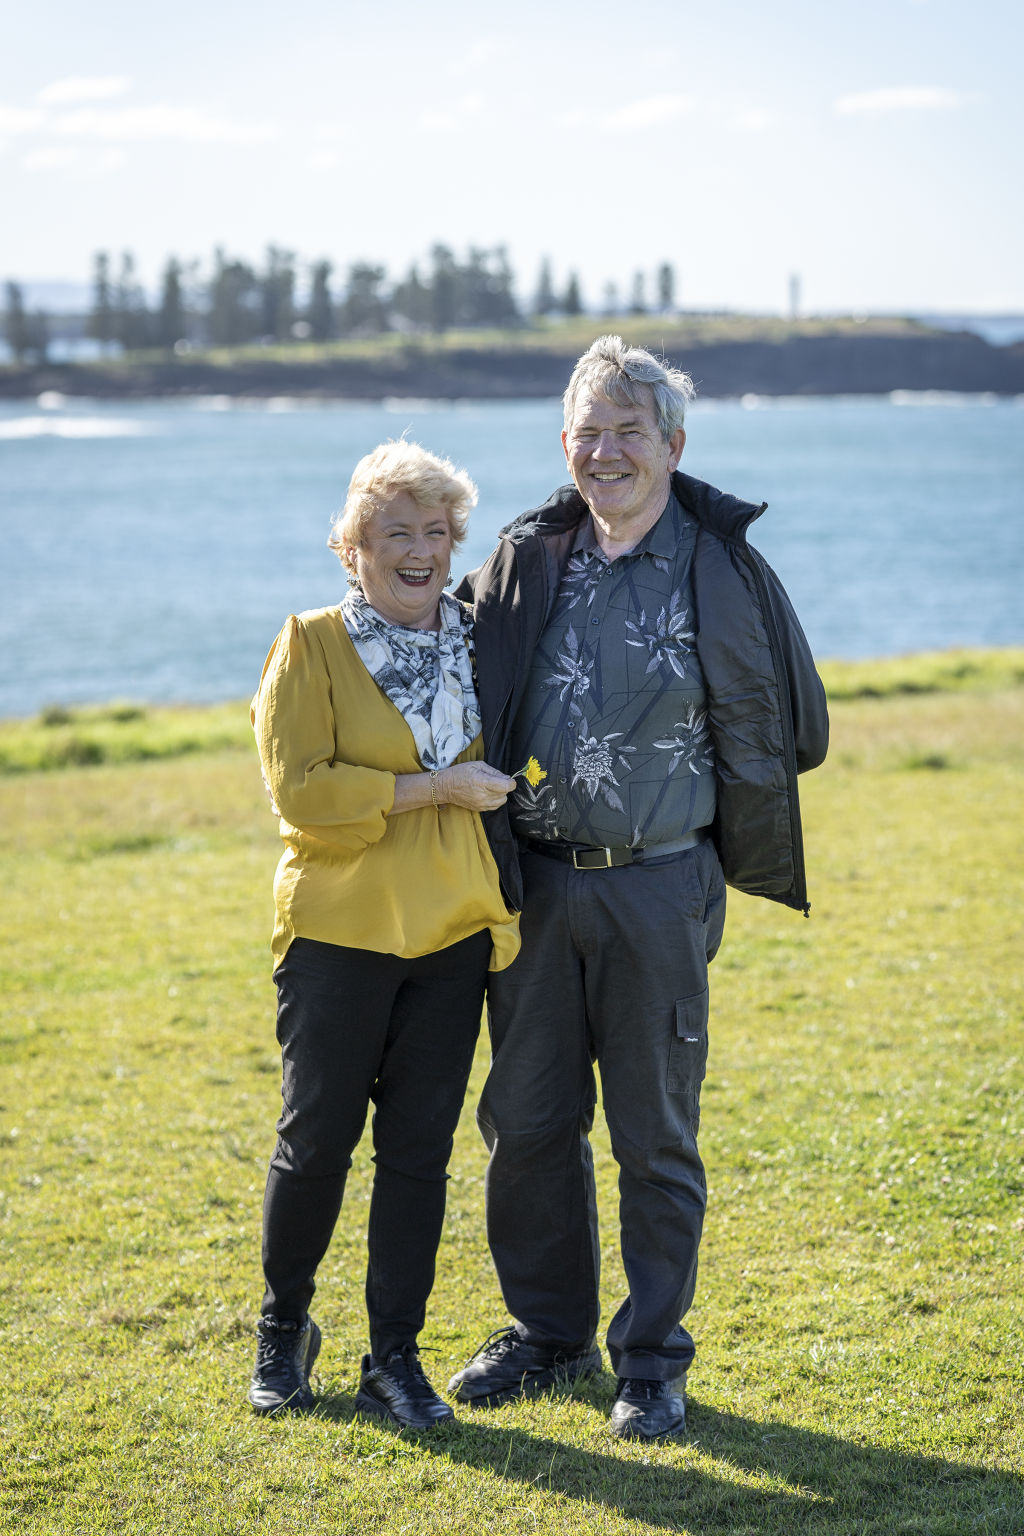 David and Yvonne had planned to downsize in Sydney but baulked at the cost. They landed on Kiama instead and couldn't be happier. Photo: Peter Izzard